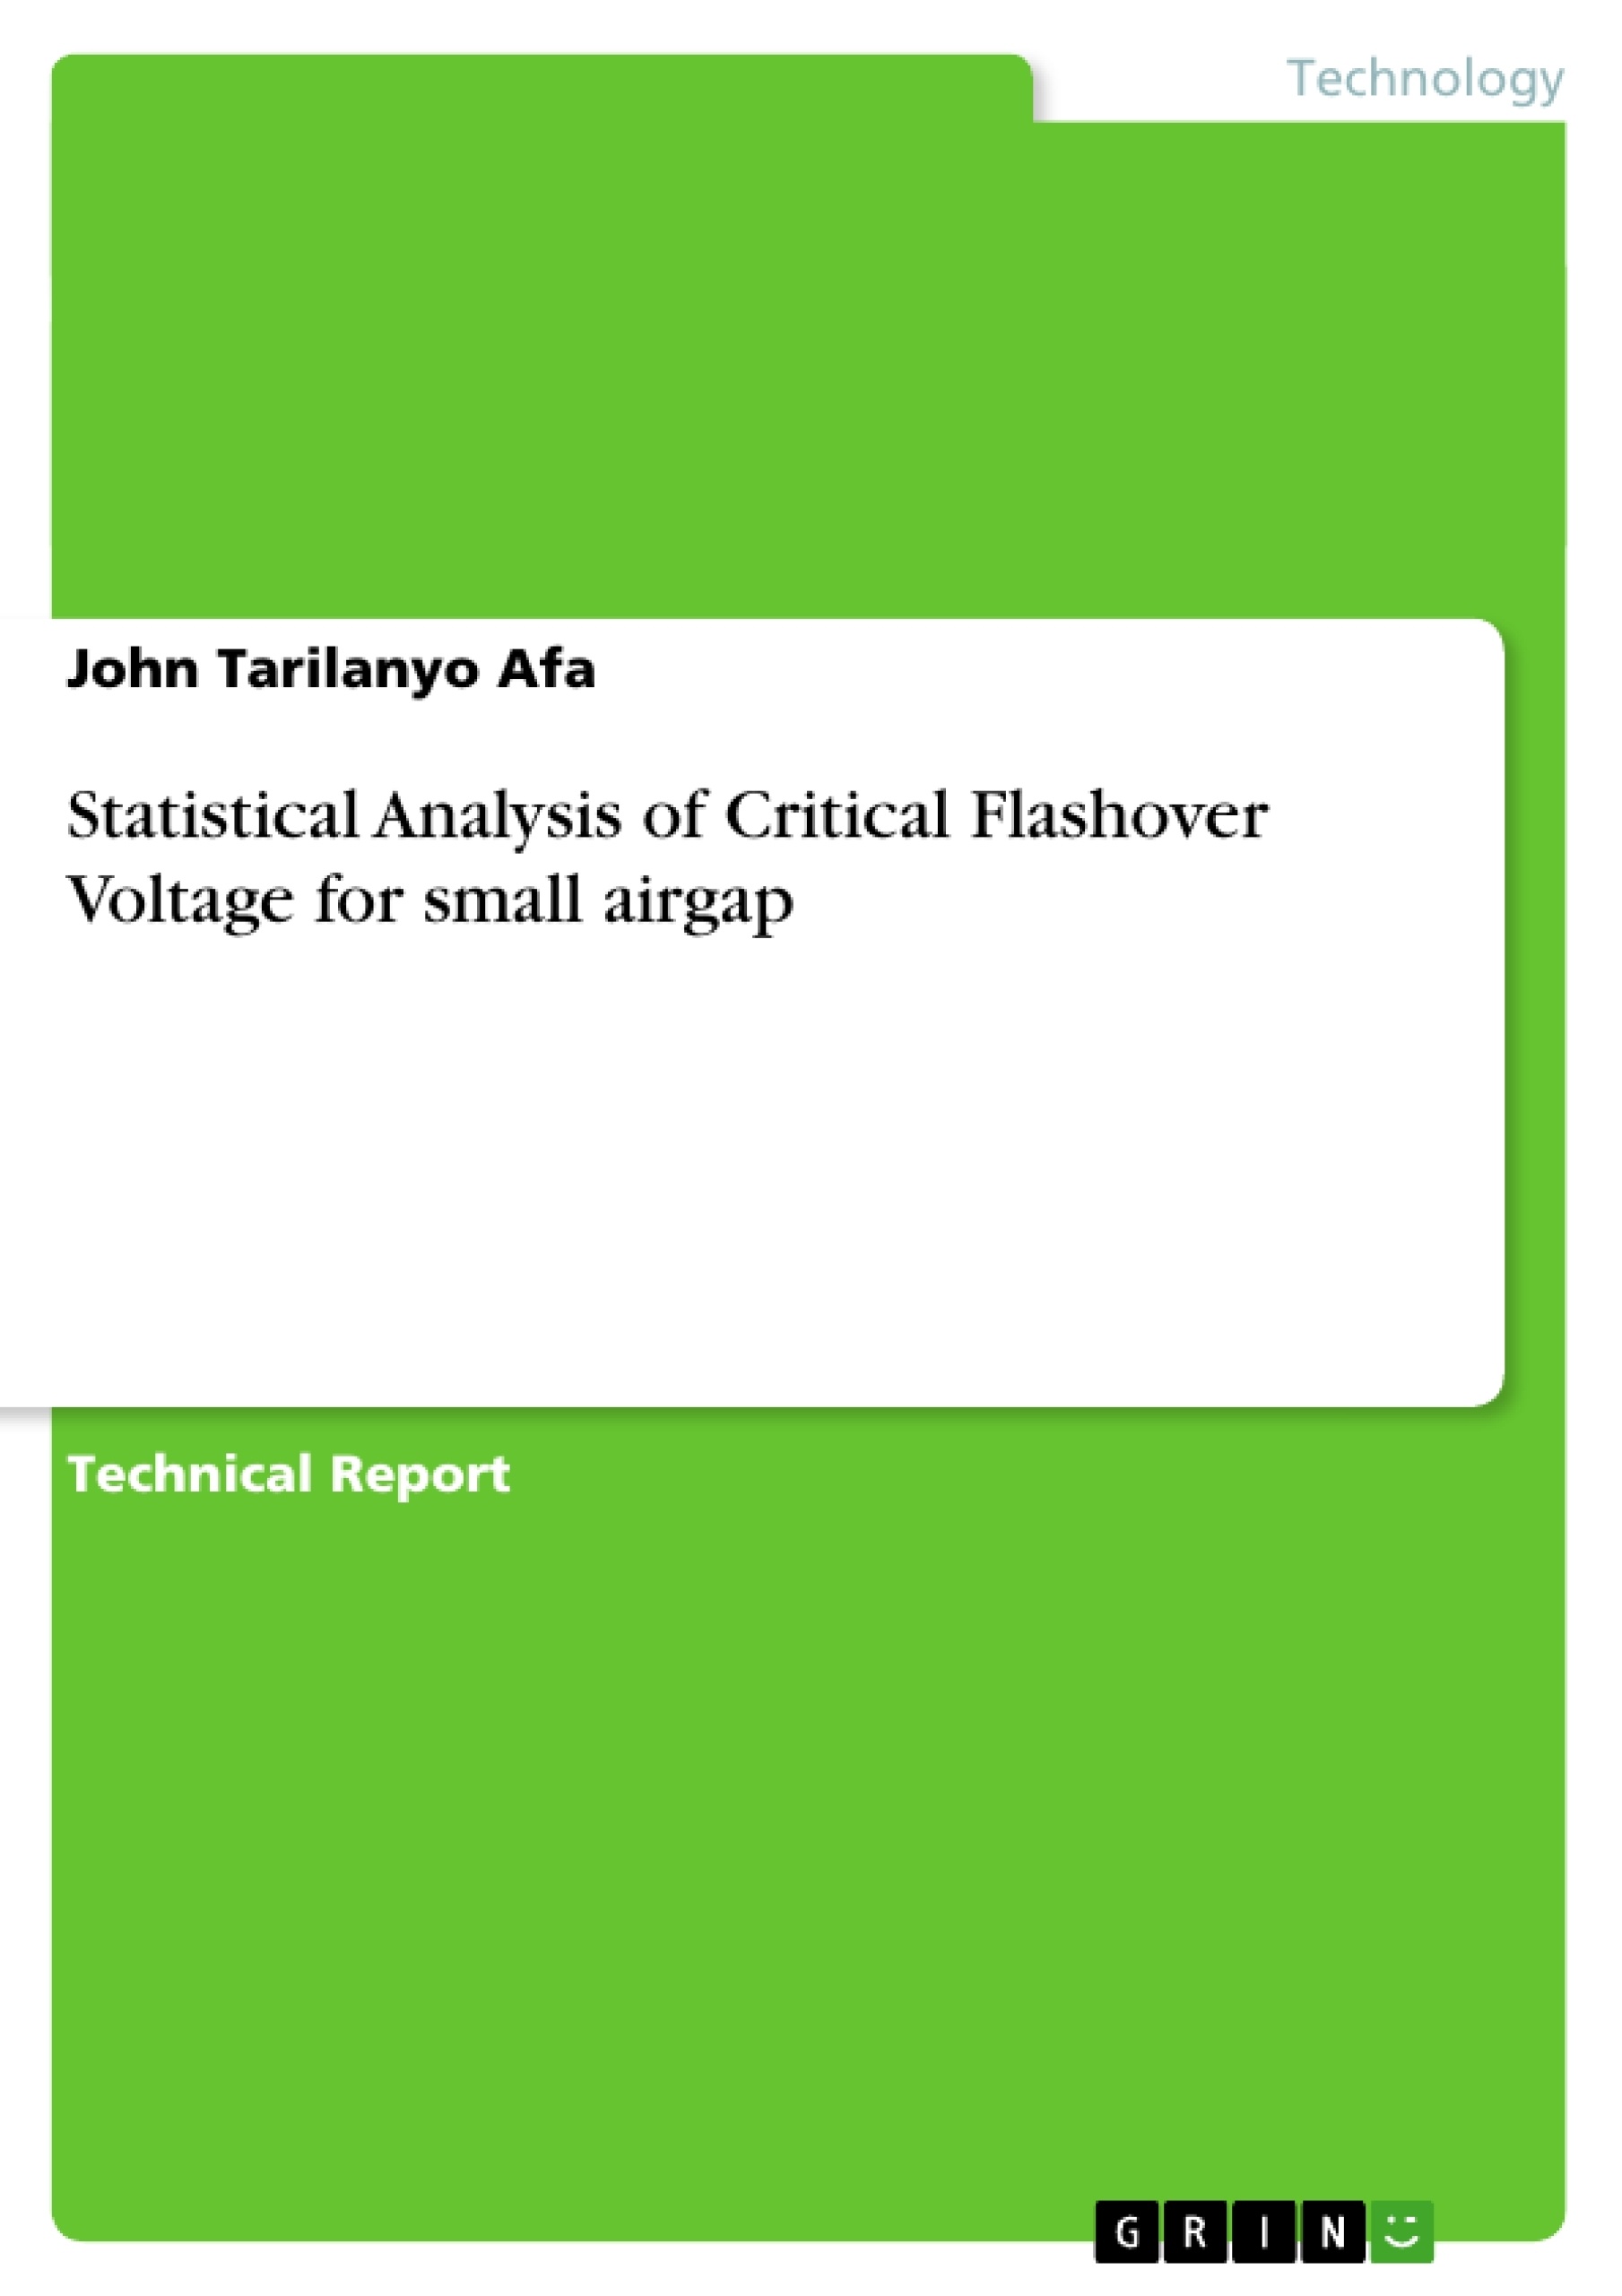 Title: Statistical Analysis of Critical Flashover Voltage for small airgap